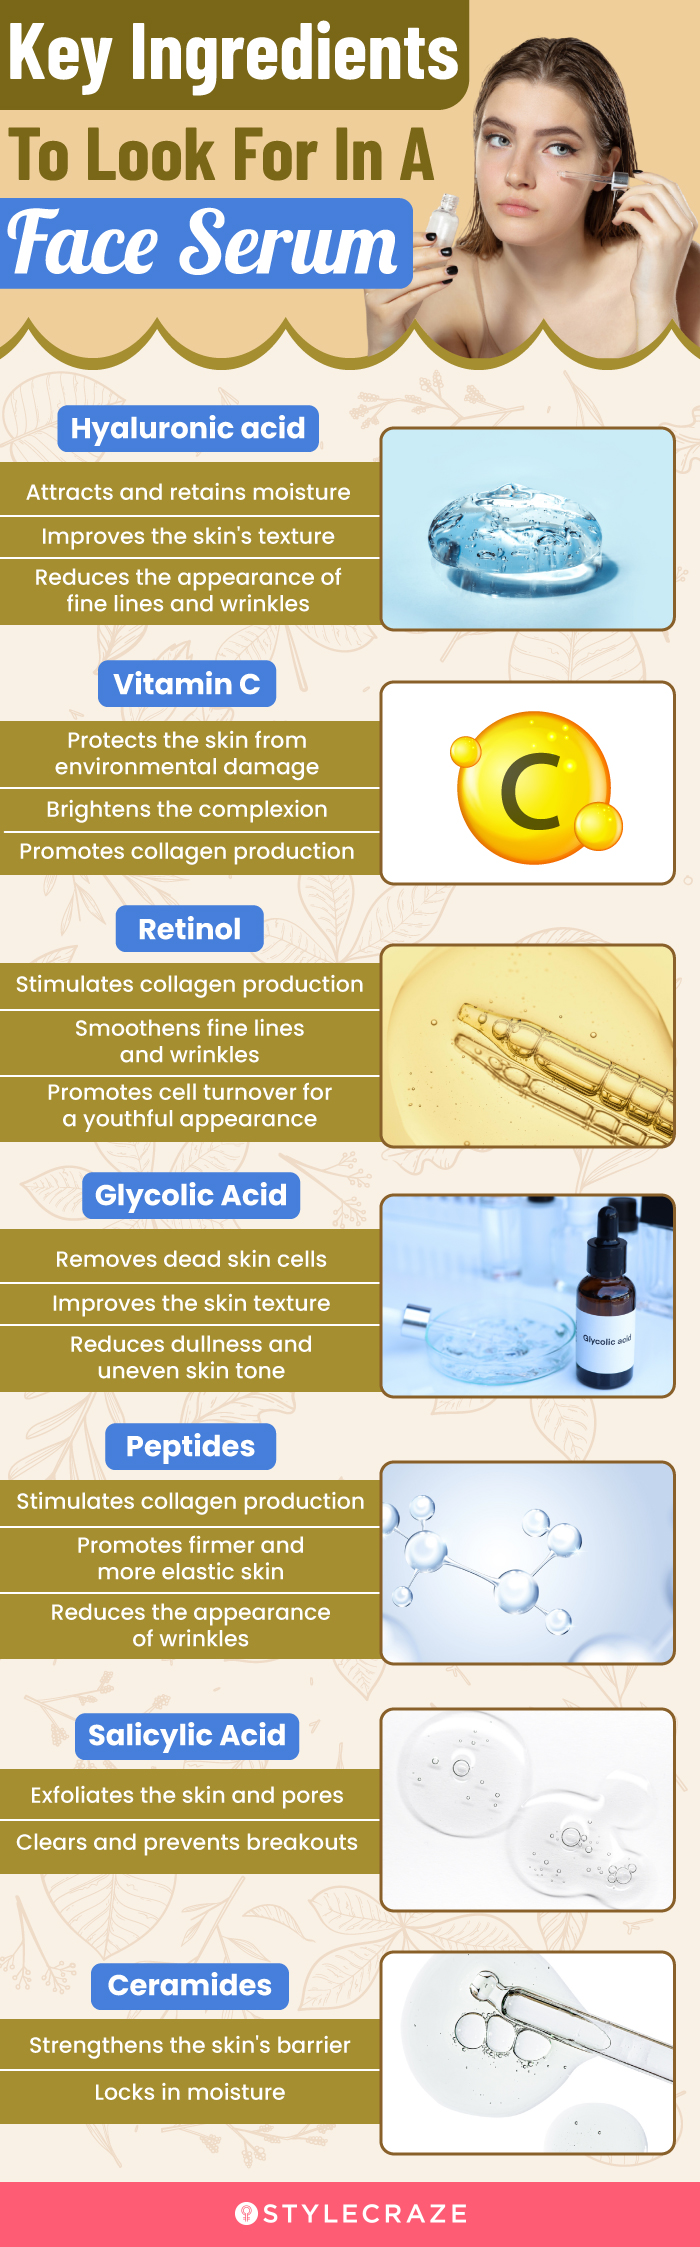 Key Ingredients To Look For In A Face Serum(infographic)